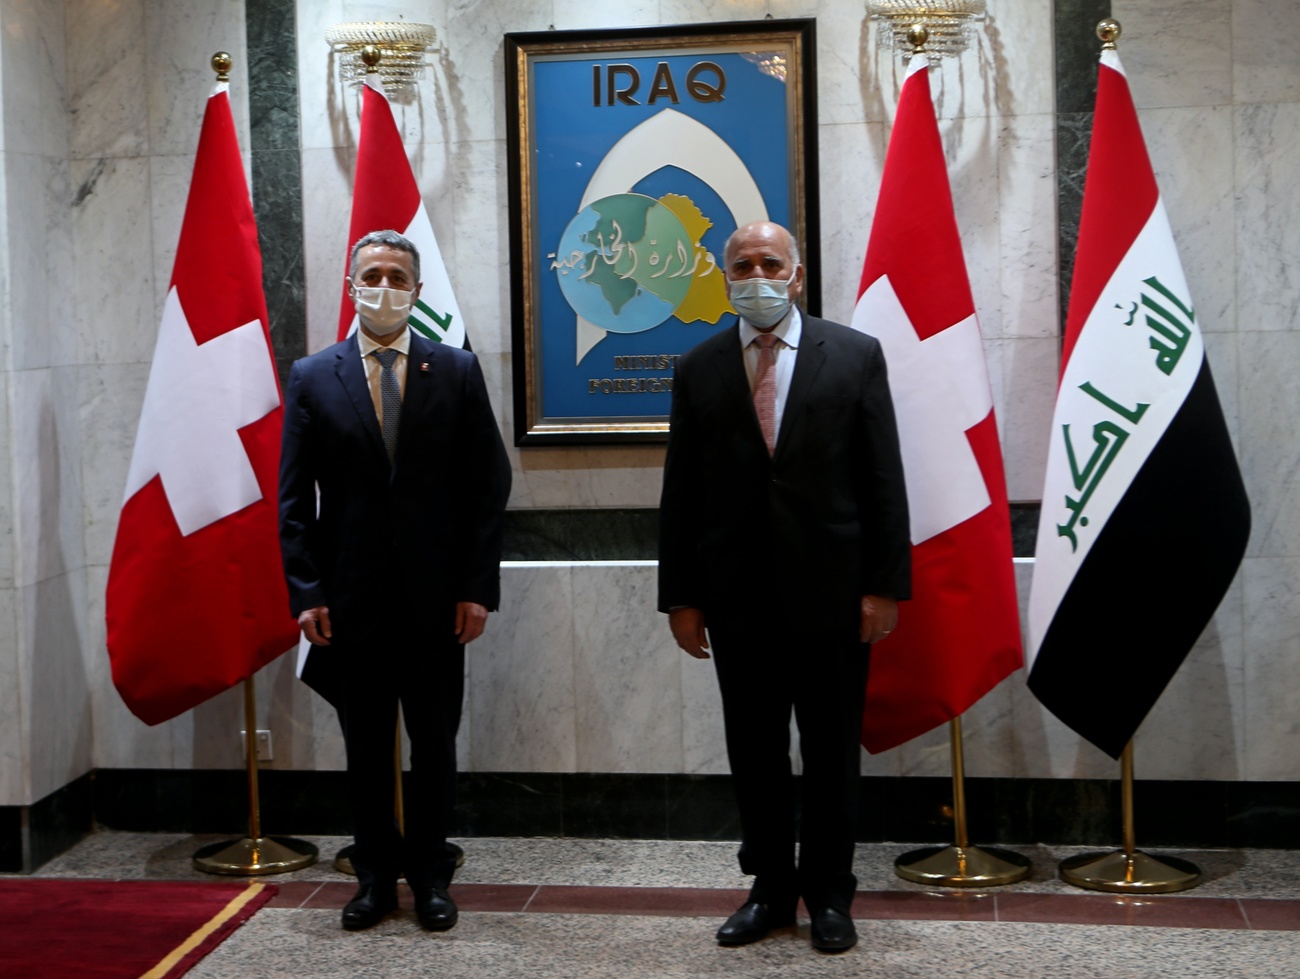 Two masked men in front of flags